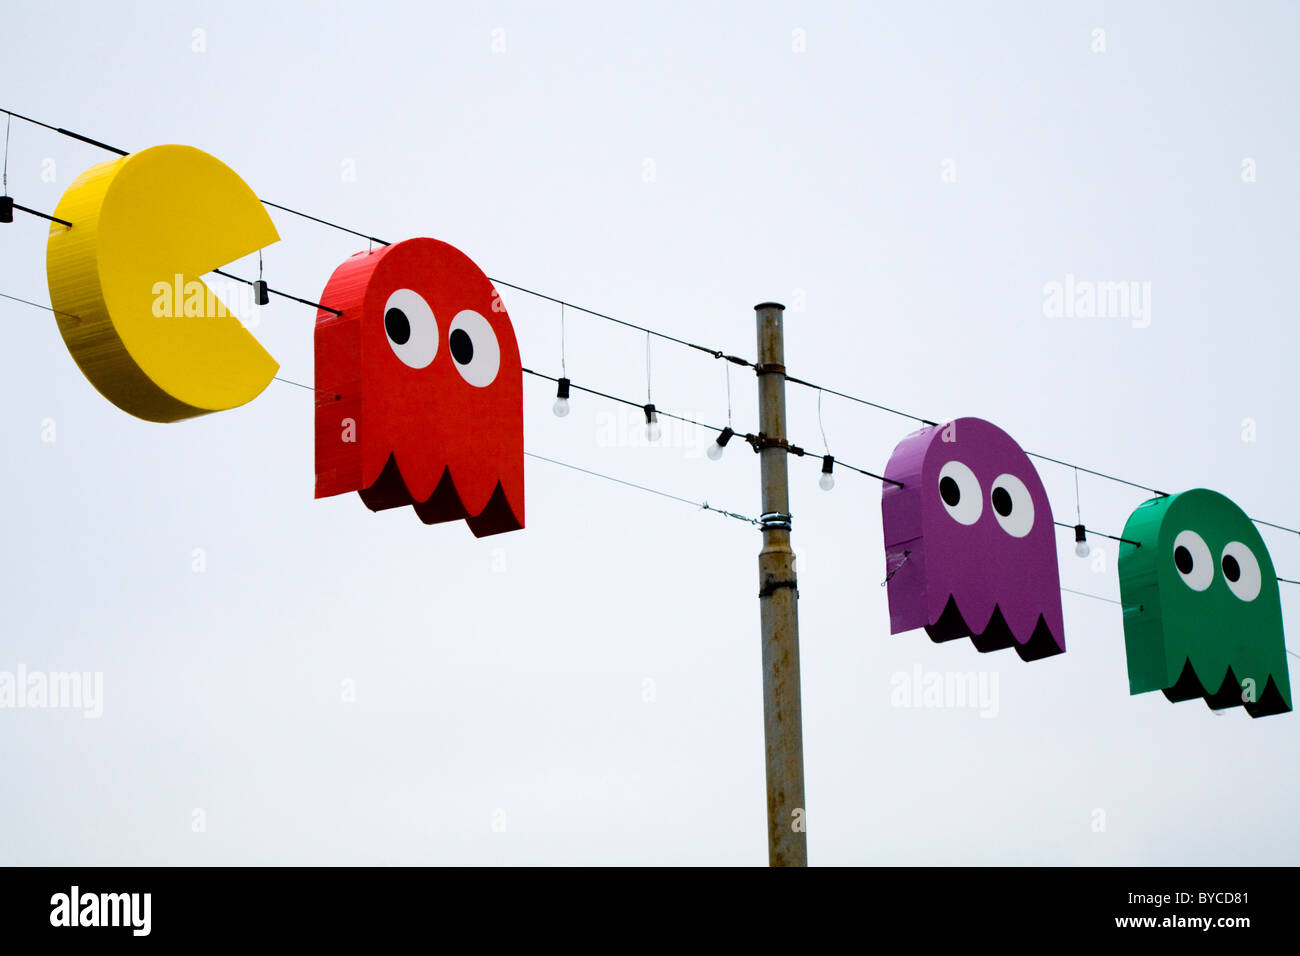 Swiss Christmas lights in shape of Pac Man / Pac Men / Pacman video game characters, by Lac / Lake Geneve. Geneva. Switzerland. Stock Photo